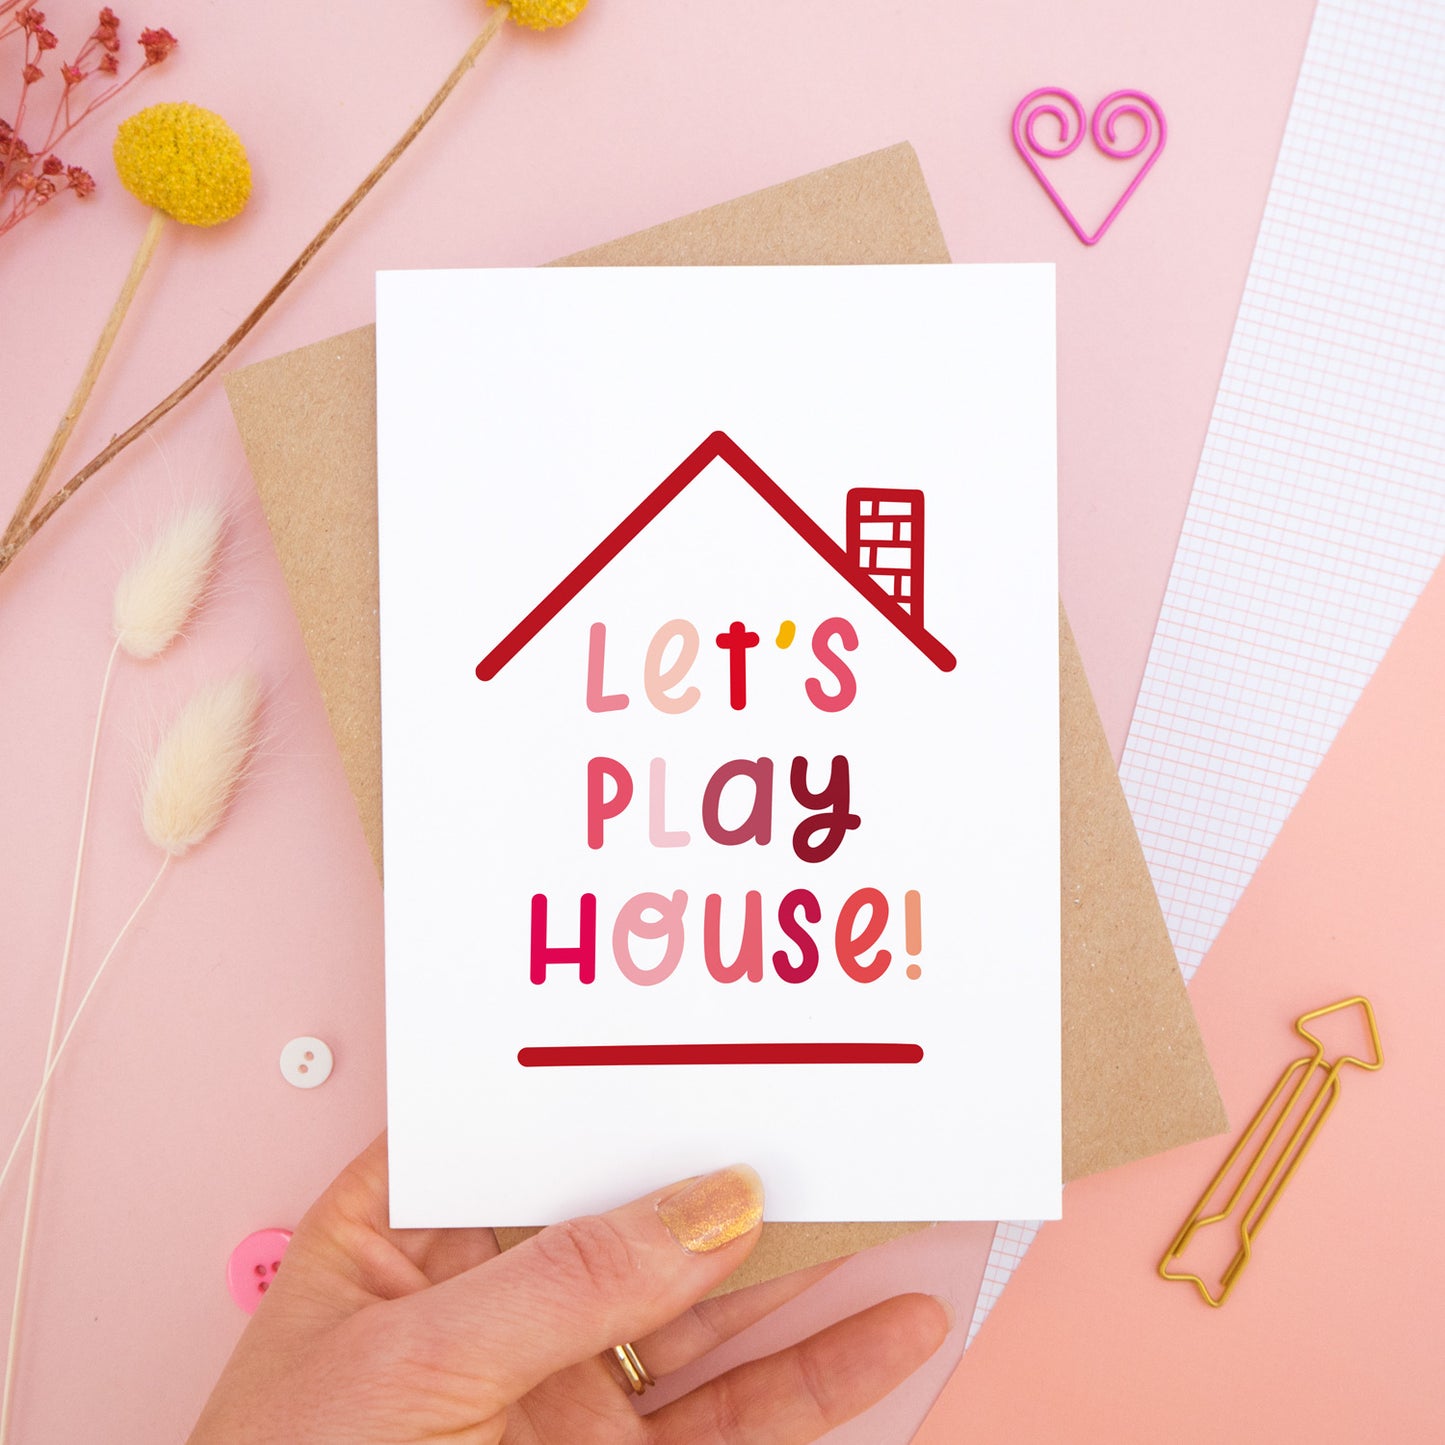 The 'let's play house' card photographed on a pink background with dried flowers, buttons and paper clips as props. The card itself is being held above the scene.